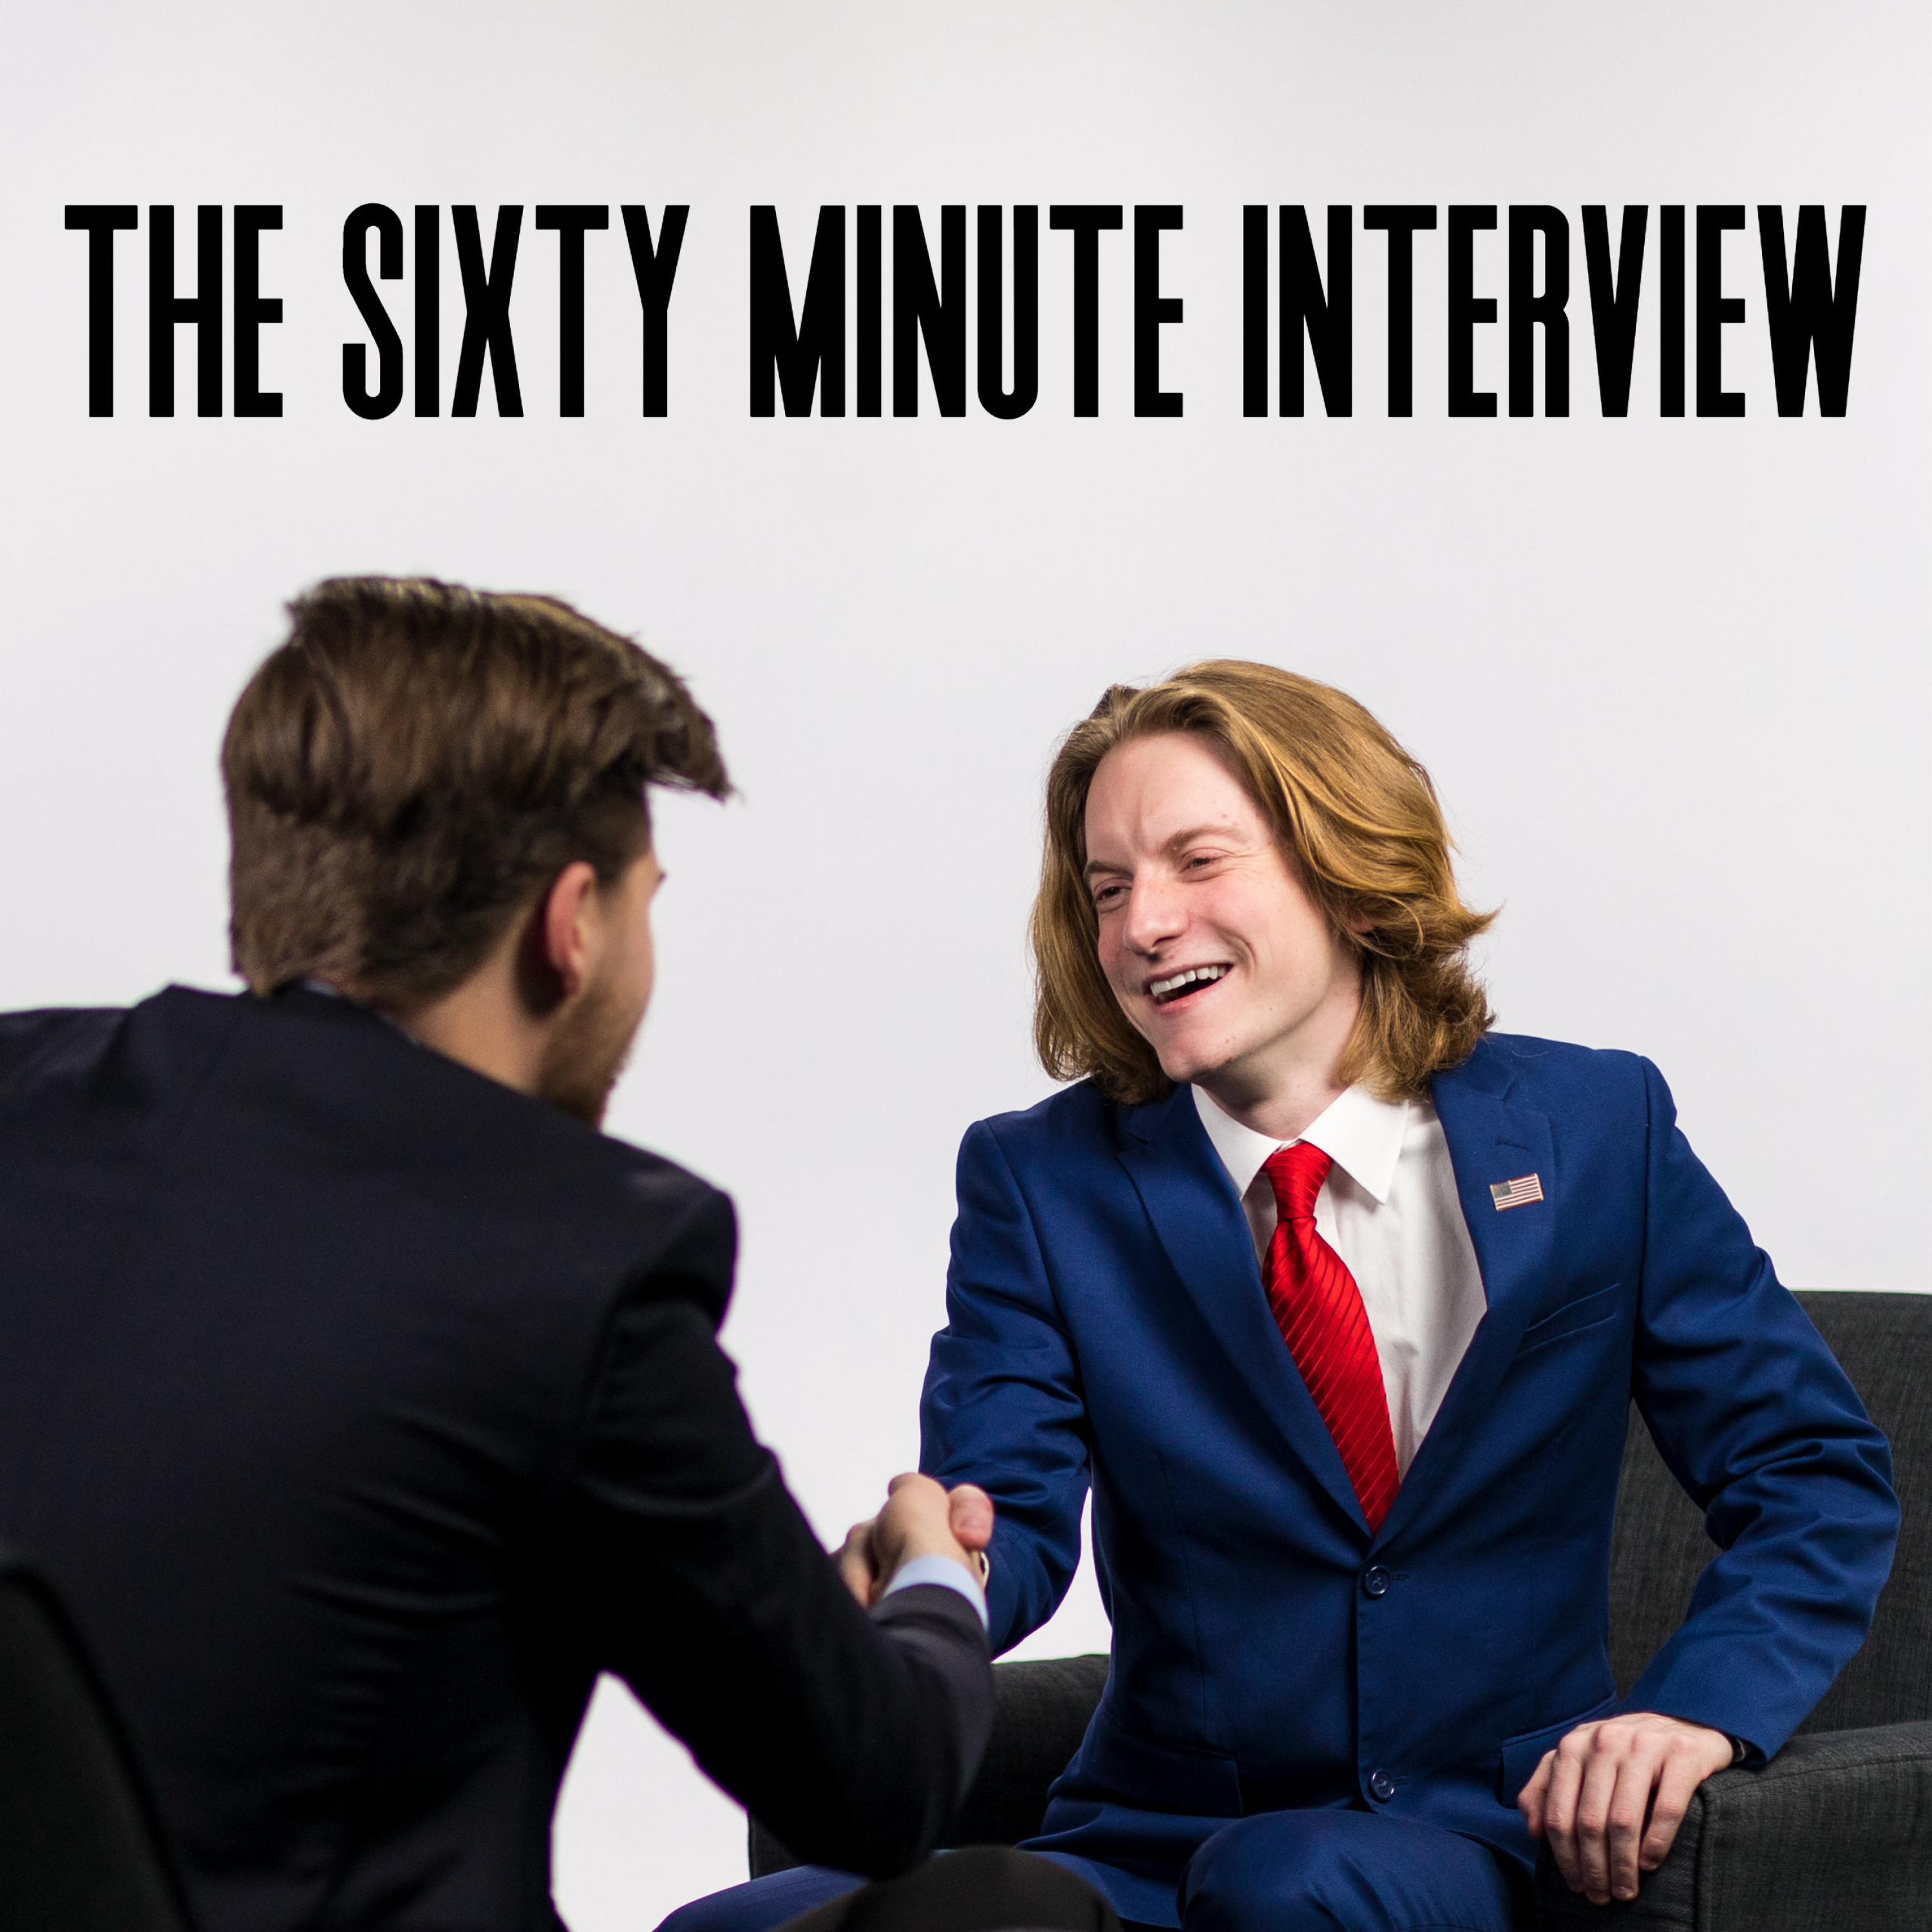 Fawcette - THE SIXTY MINUTE INTERVIEW (Intro)